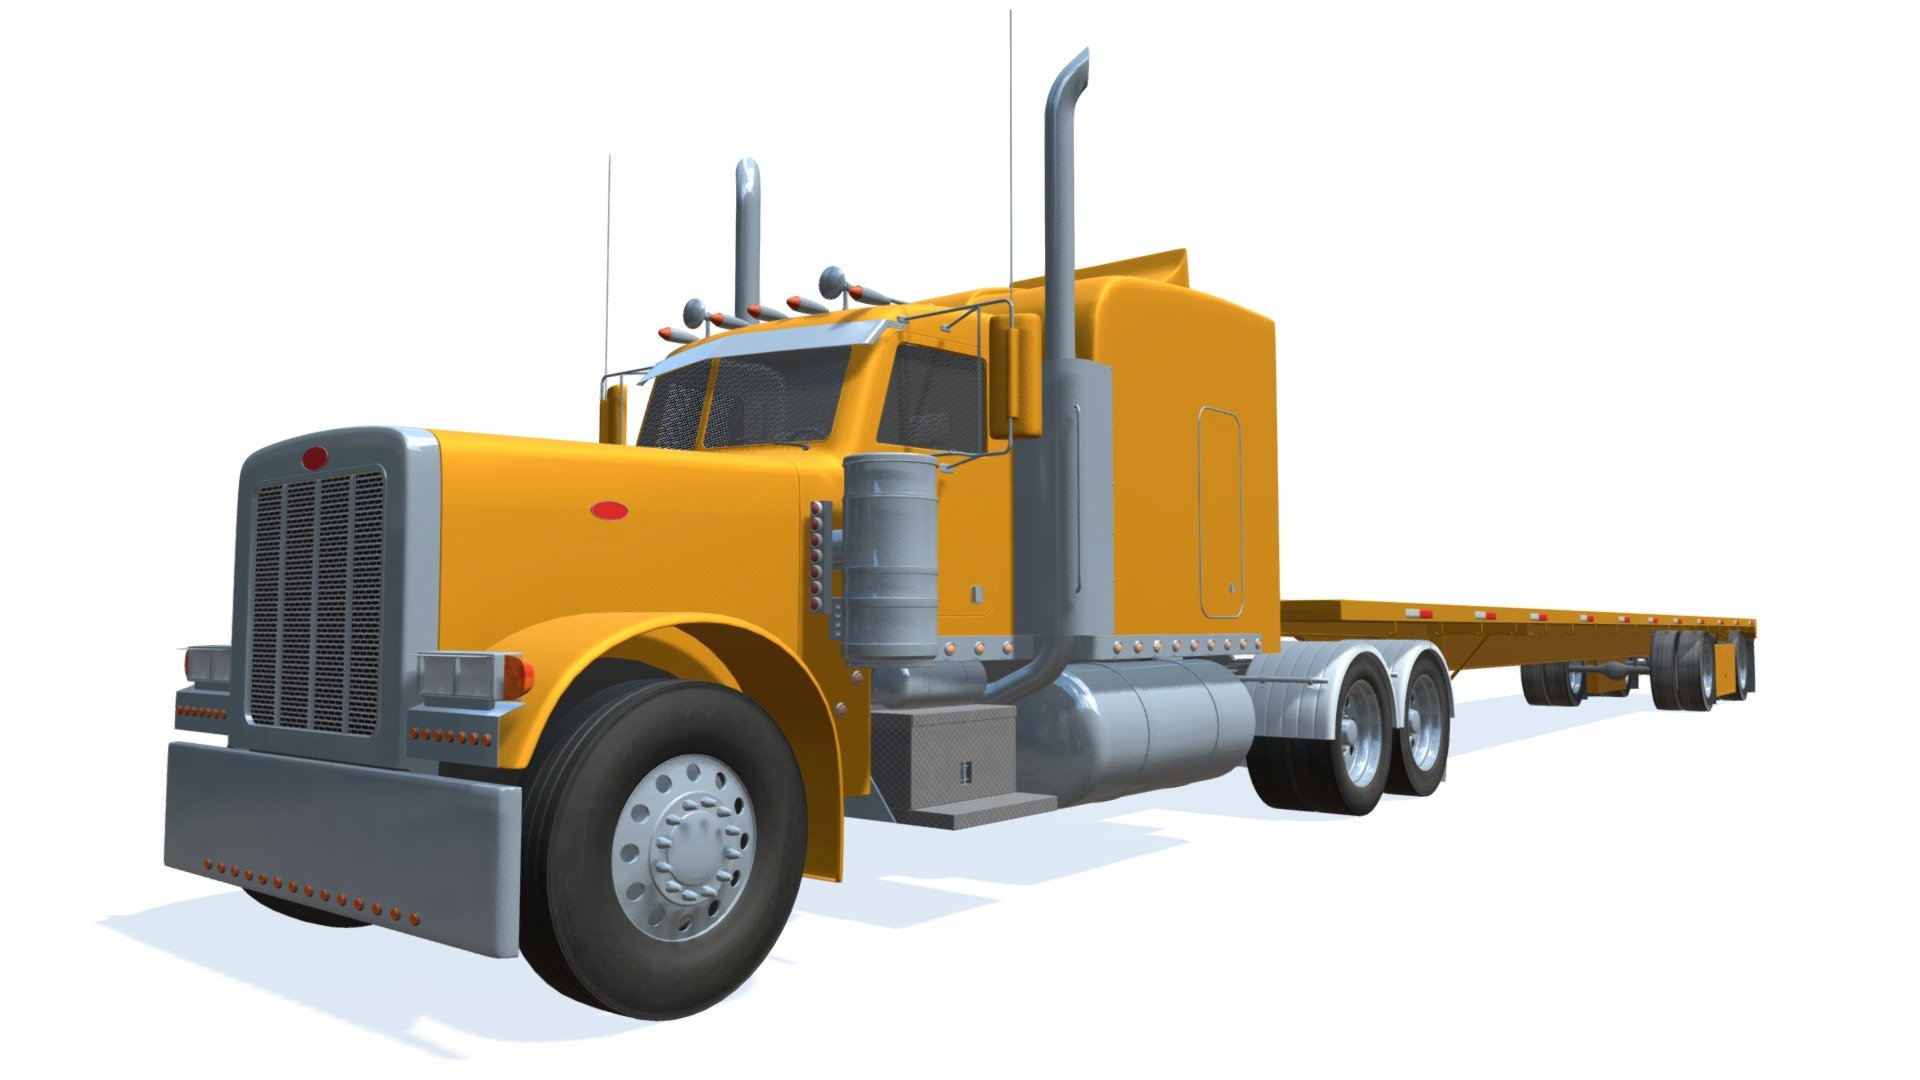 High quality 3d model of heavy truck with flatbed trailer 3d model